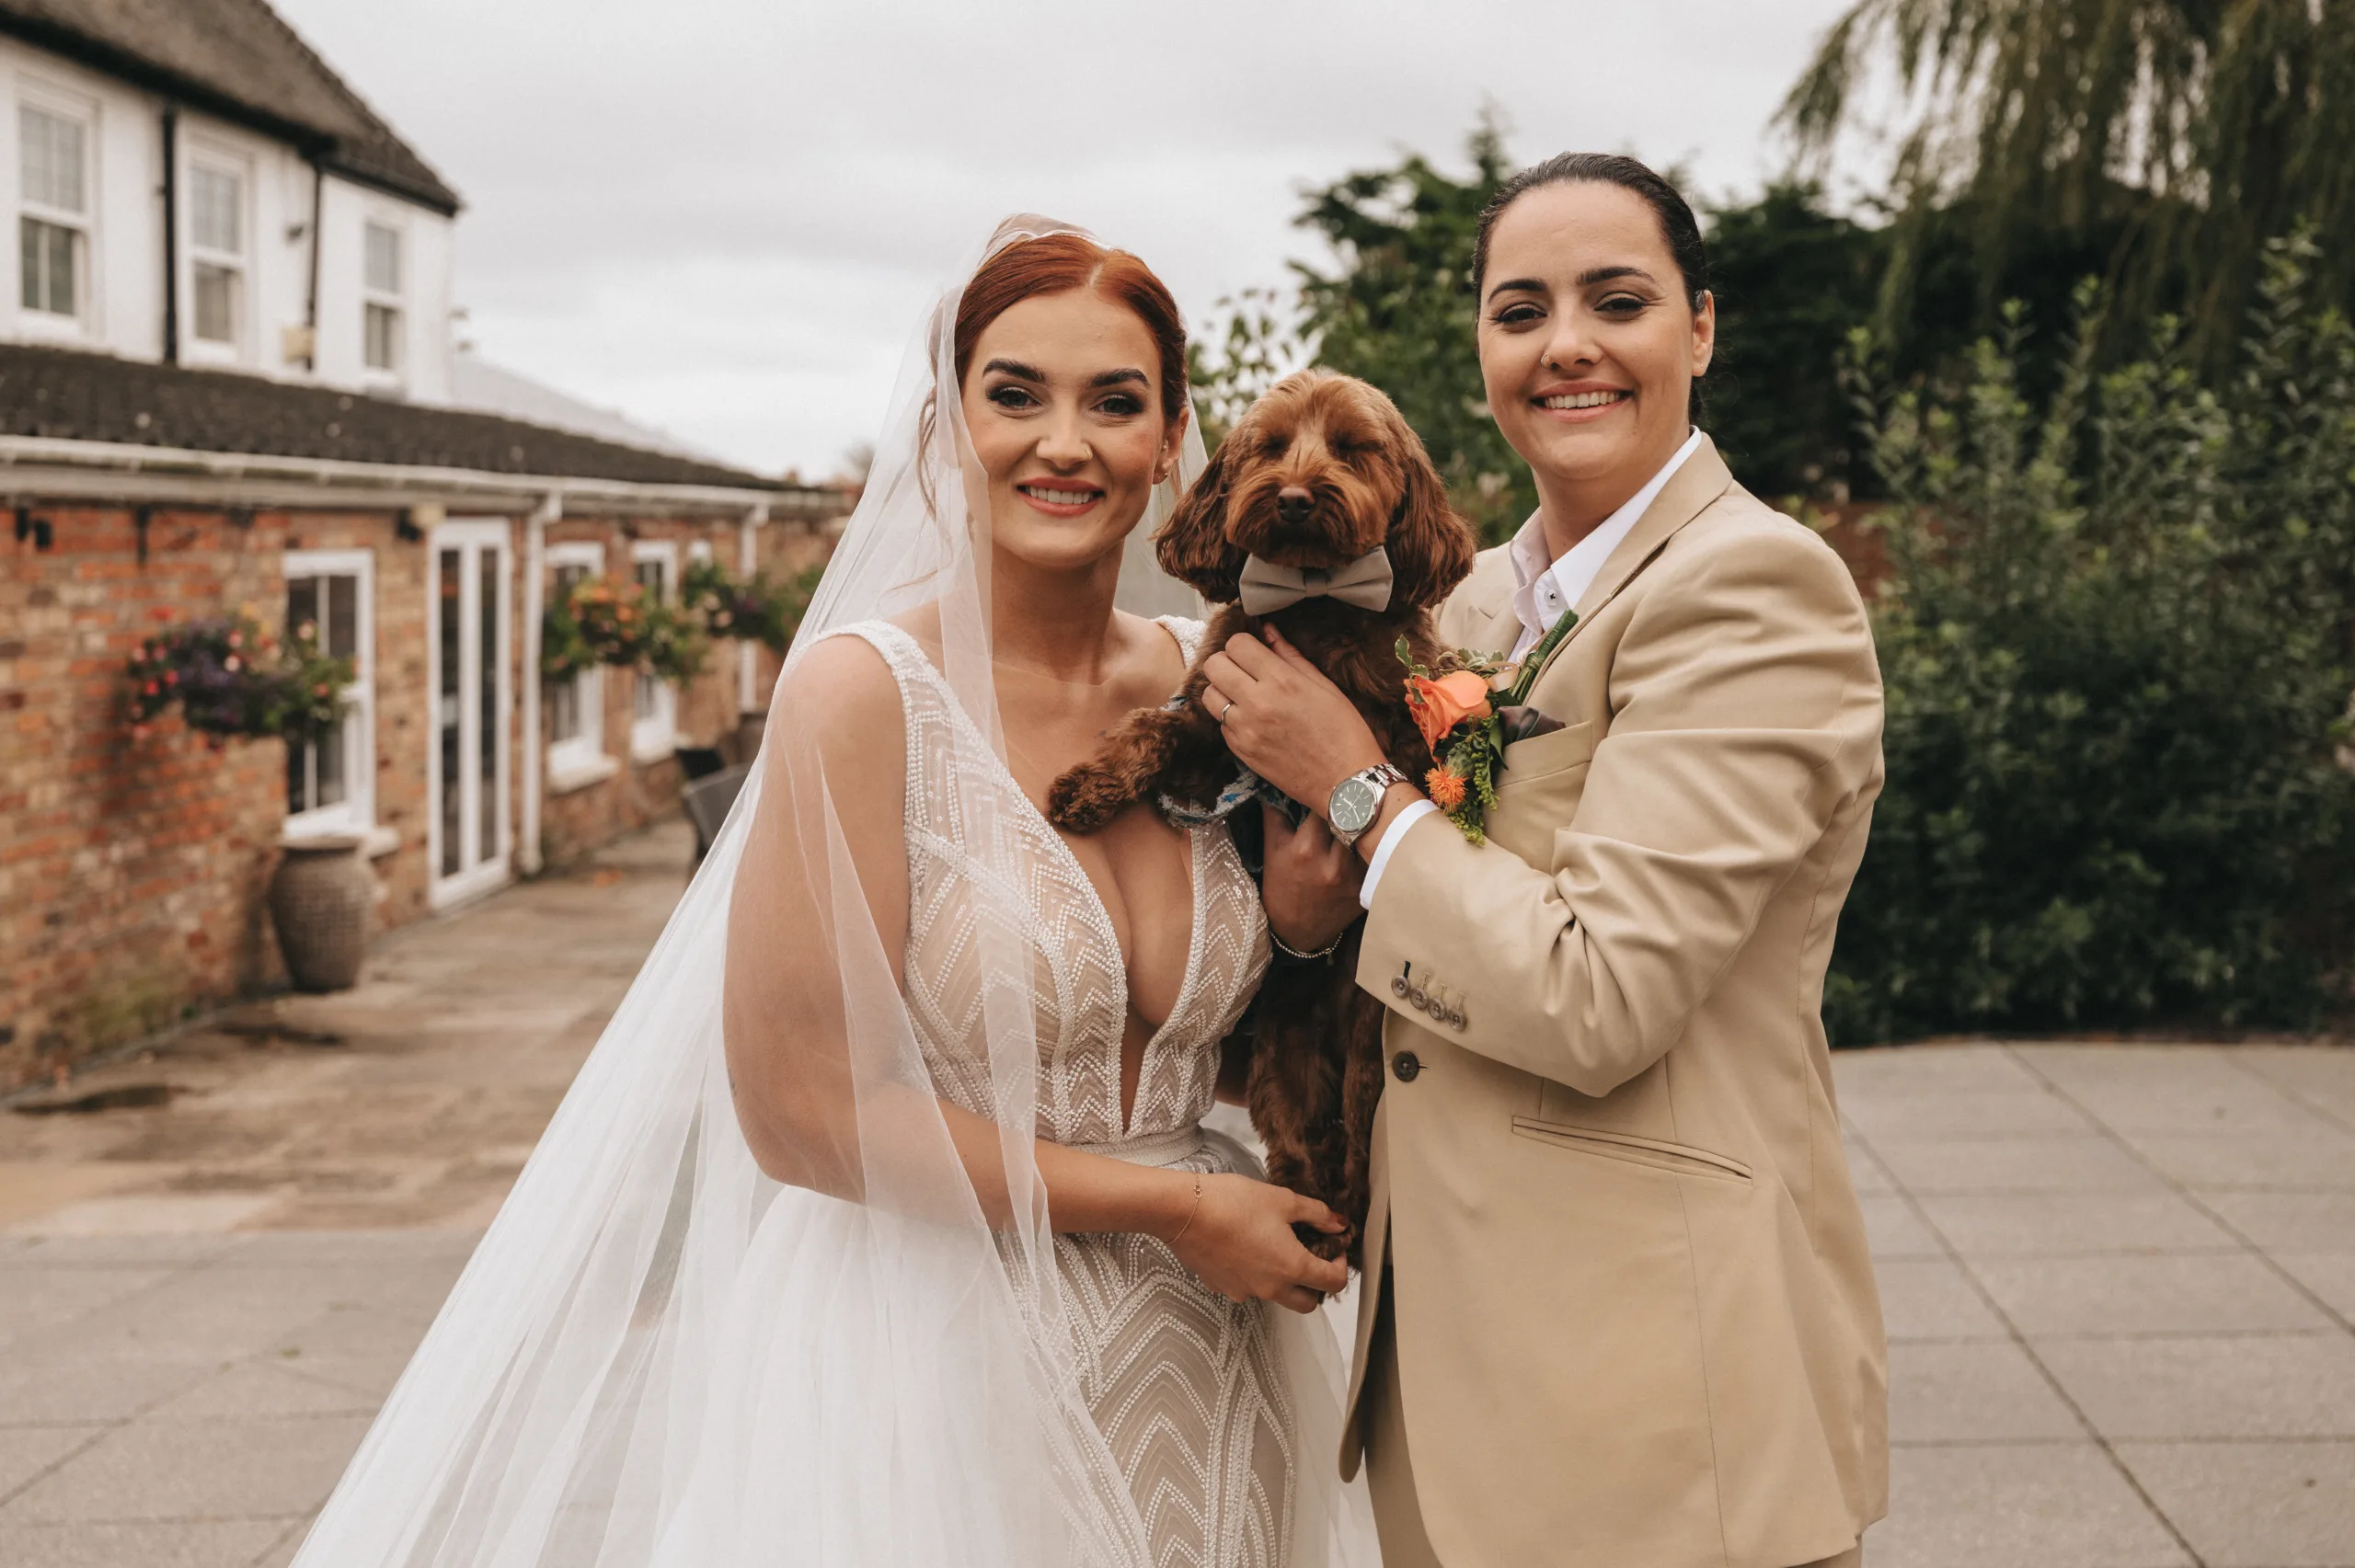 A Yorkshire photographer captures two brides posing with their dog in front of a brick building.